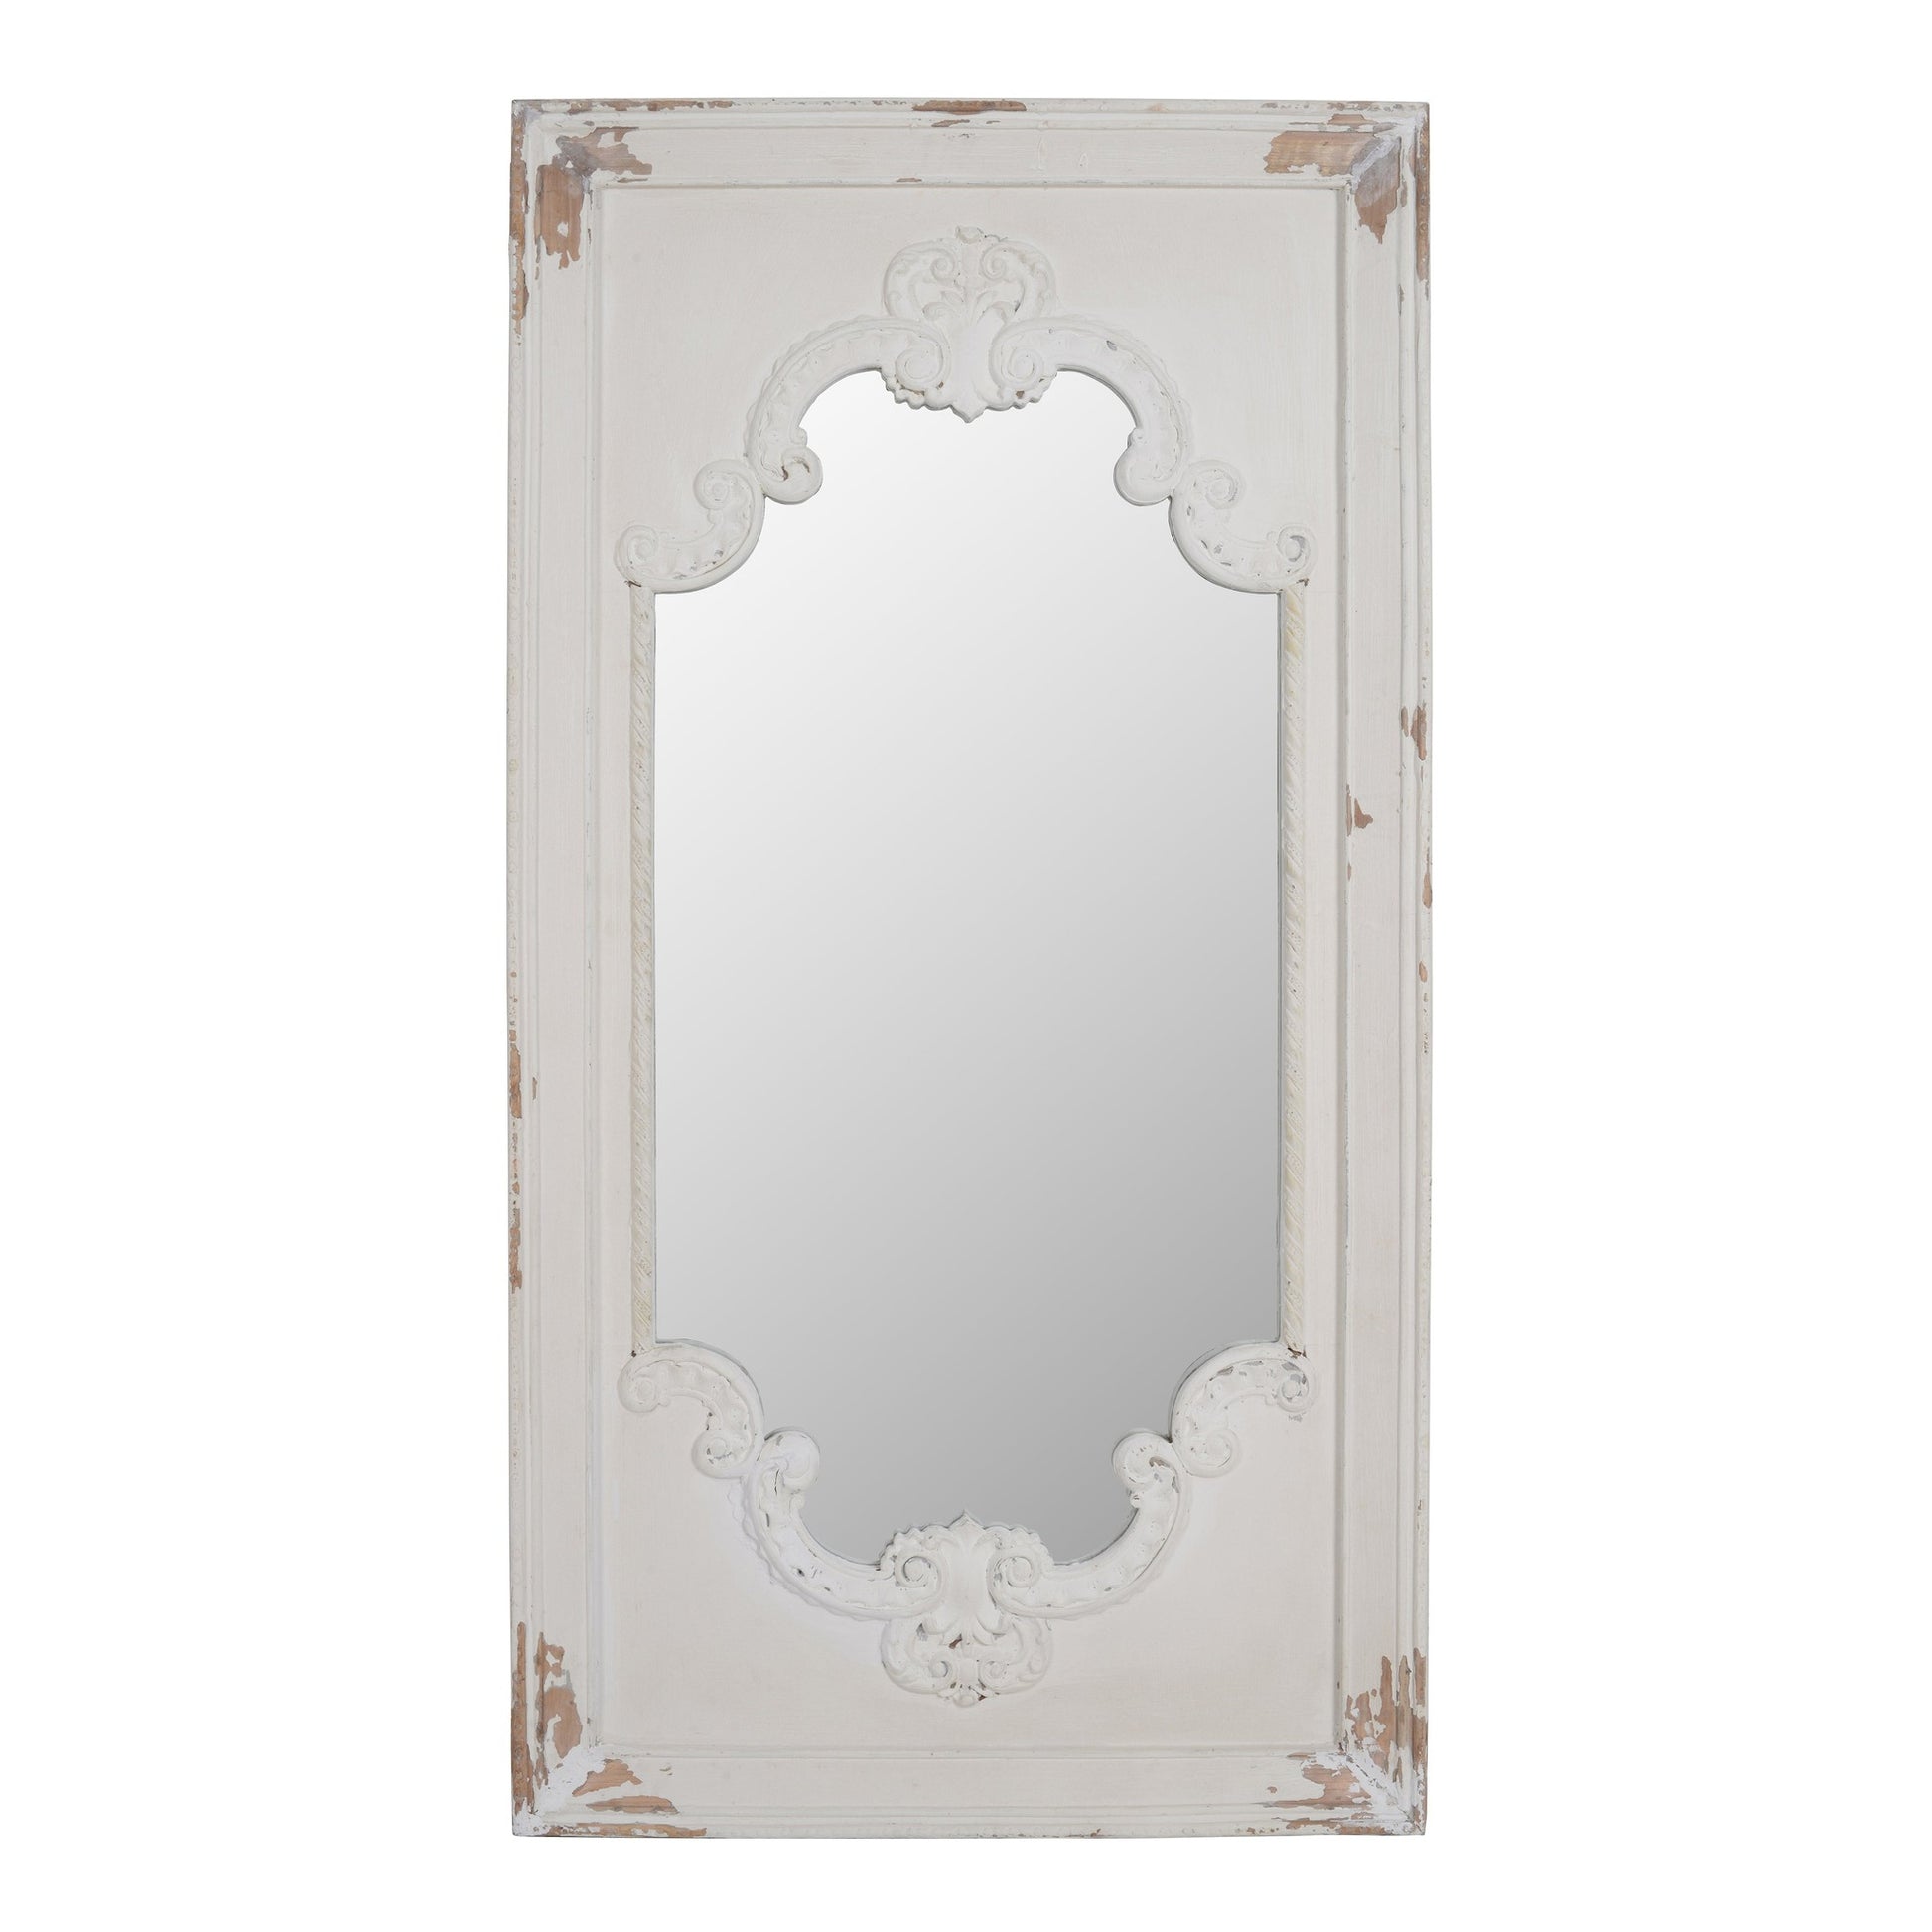 Benzara 54" White Rectangular Wooden Framed Wall Mirror With Chipped Edges and Hook